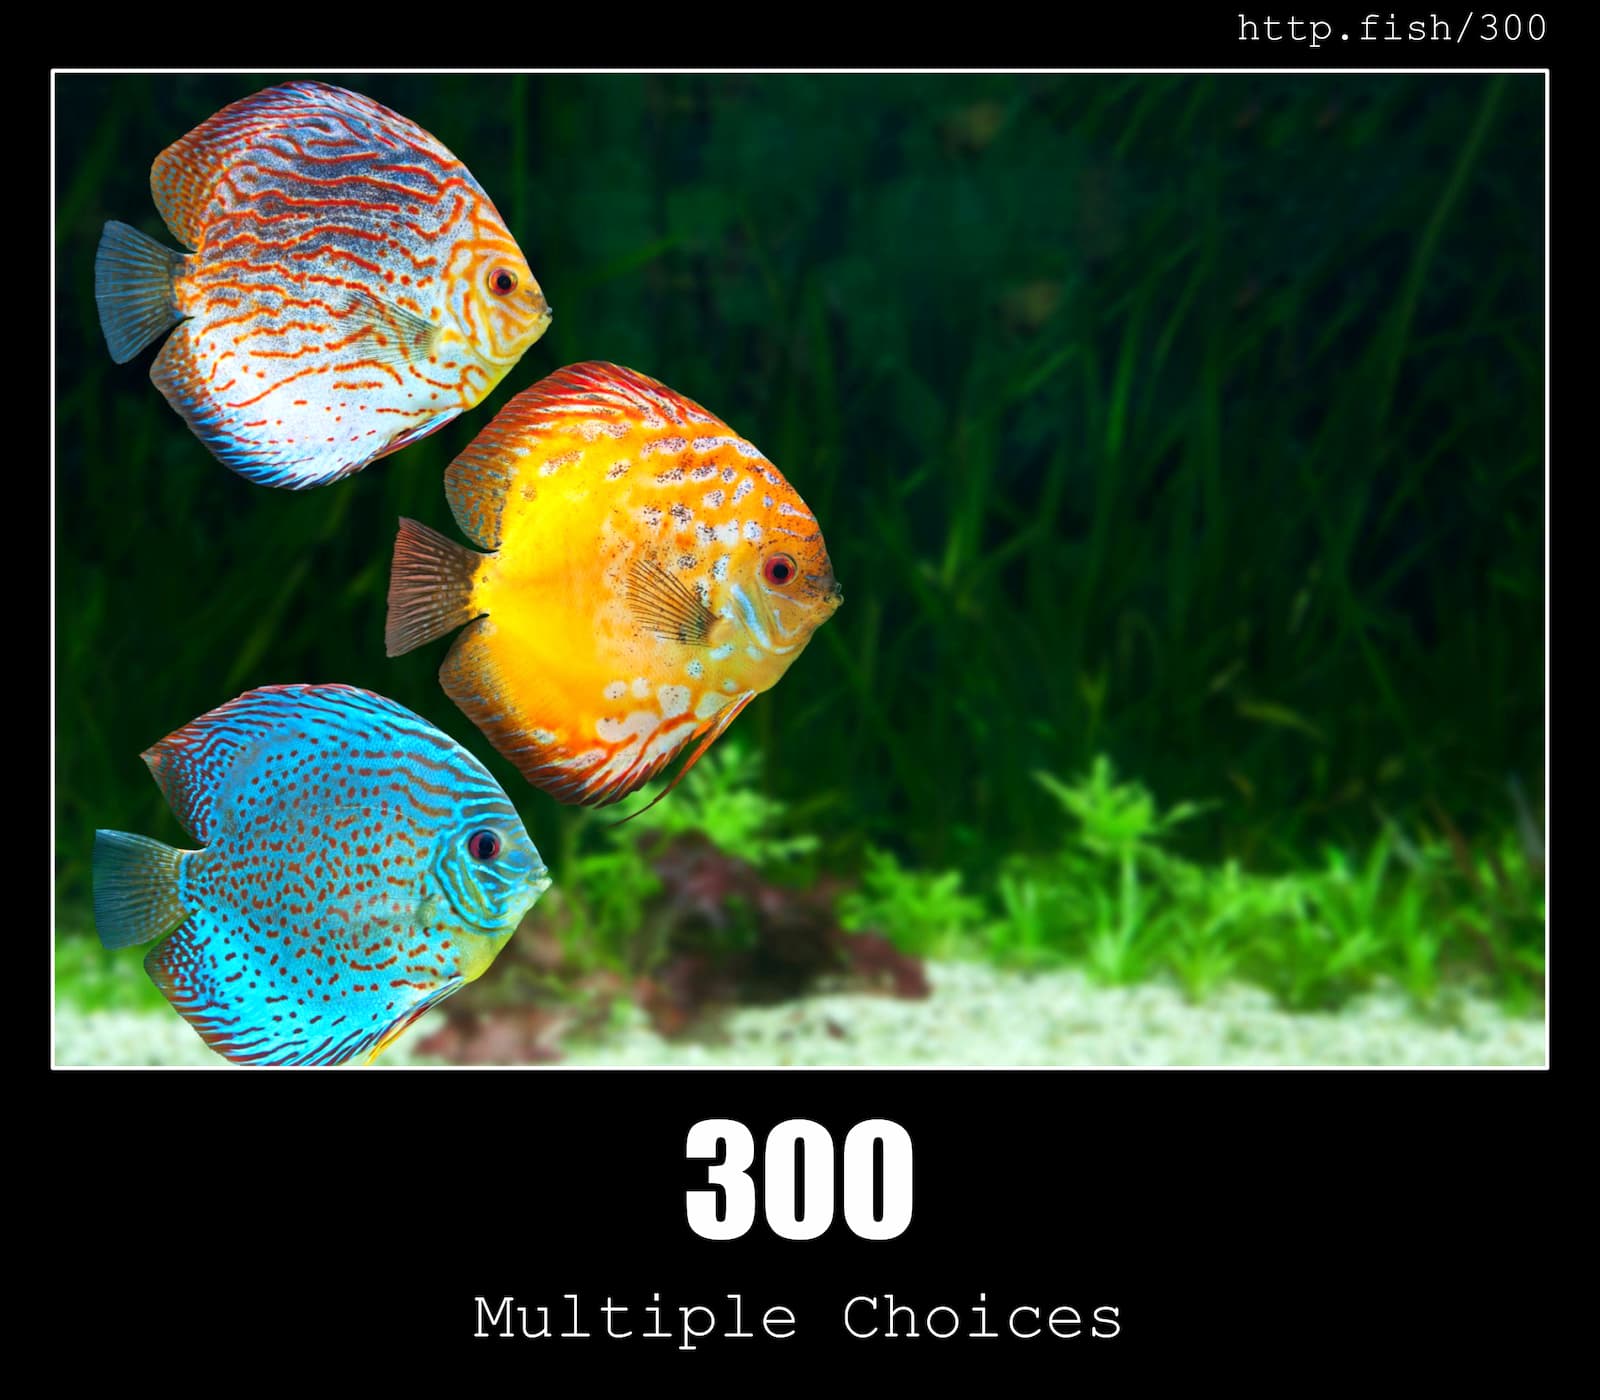 HTTP Status Code 300 Multiple Choices & Fish